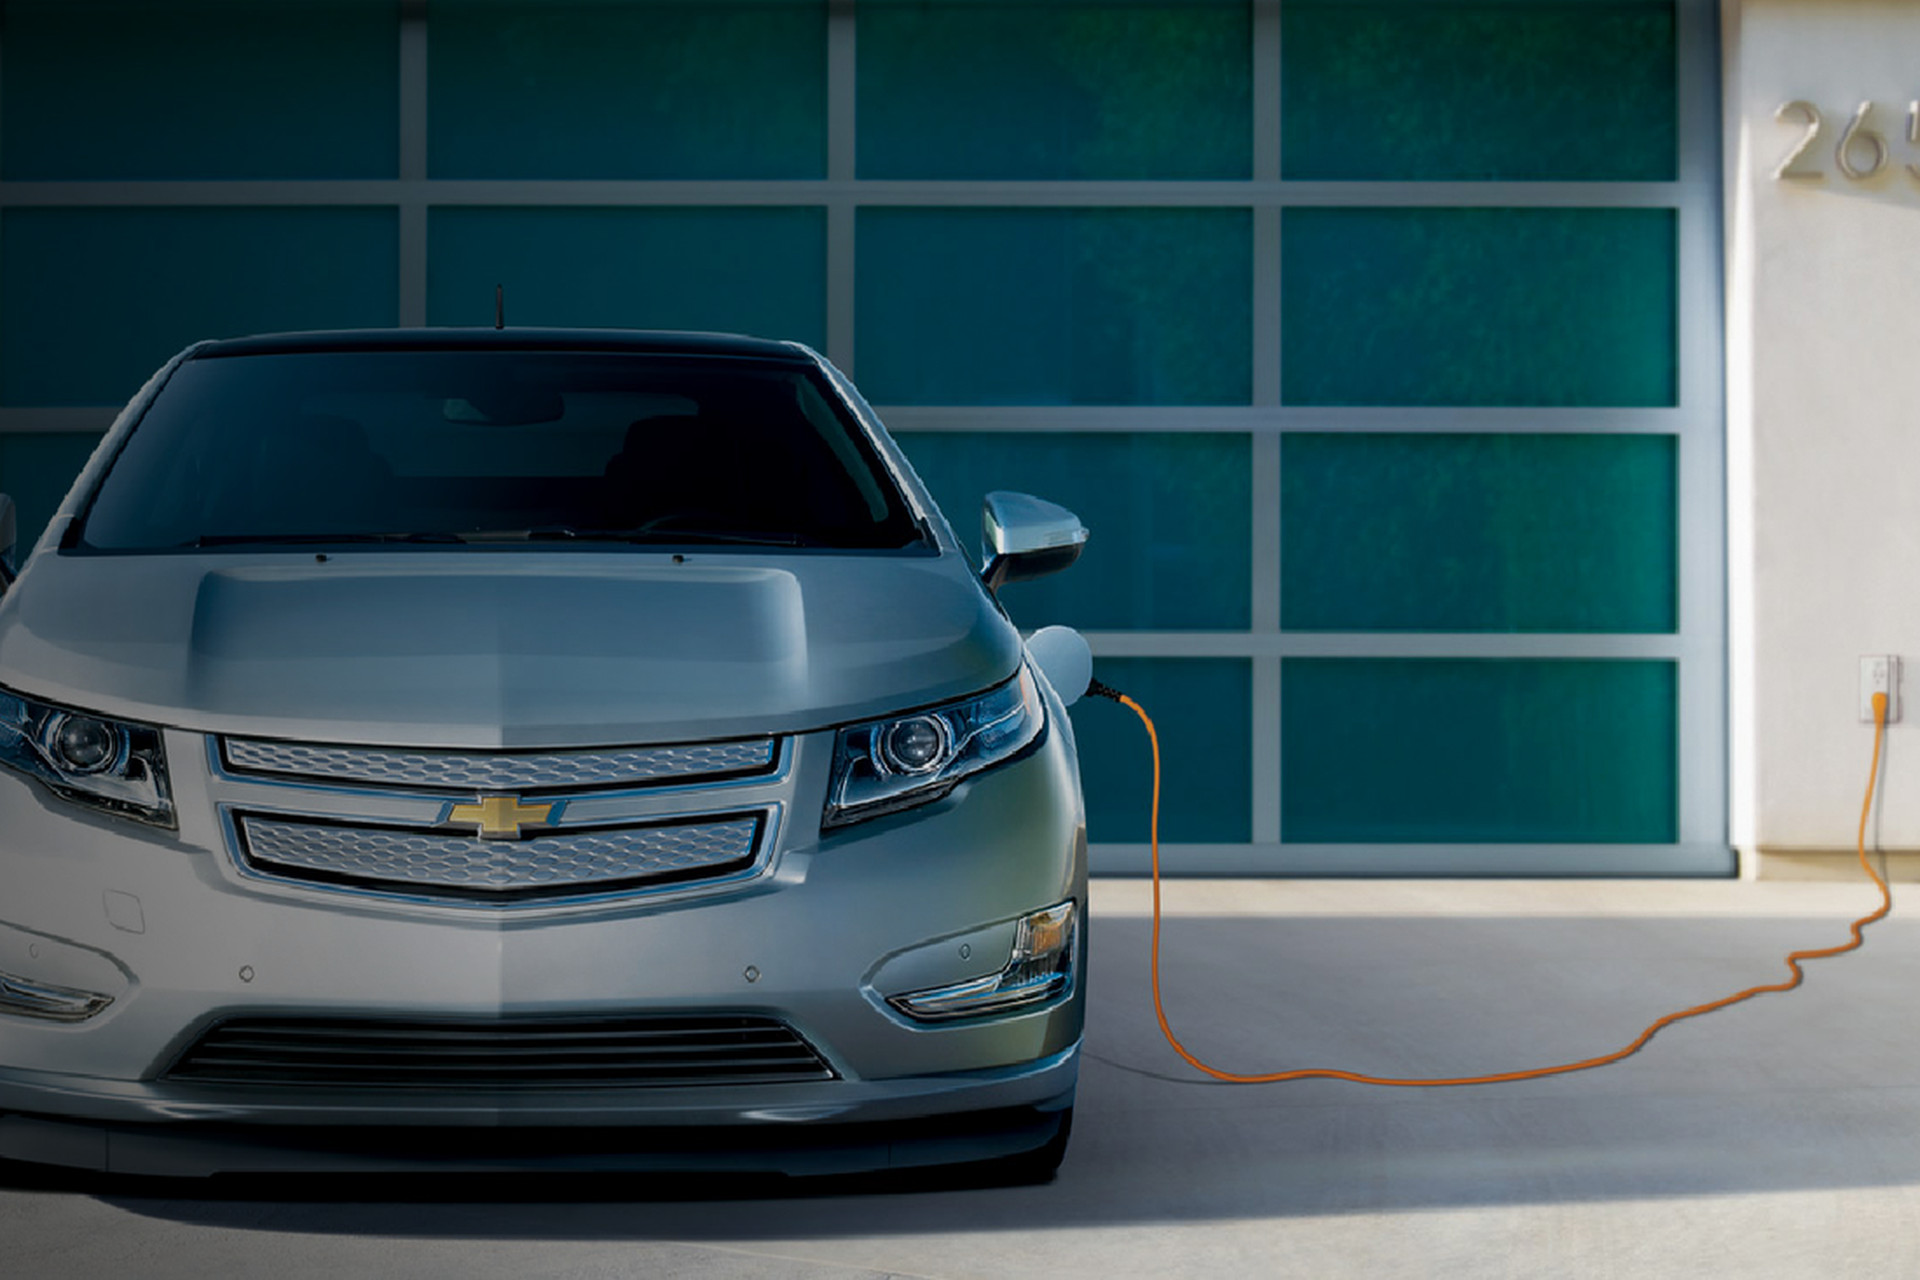 chevy-cutting-price-of-the-2014-volt-electric-car-by-5-000-the-verge